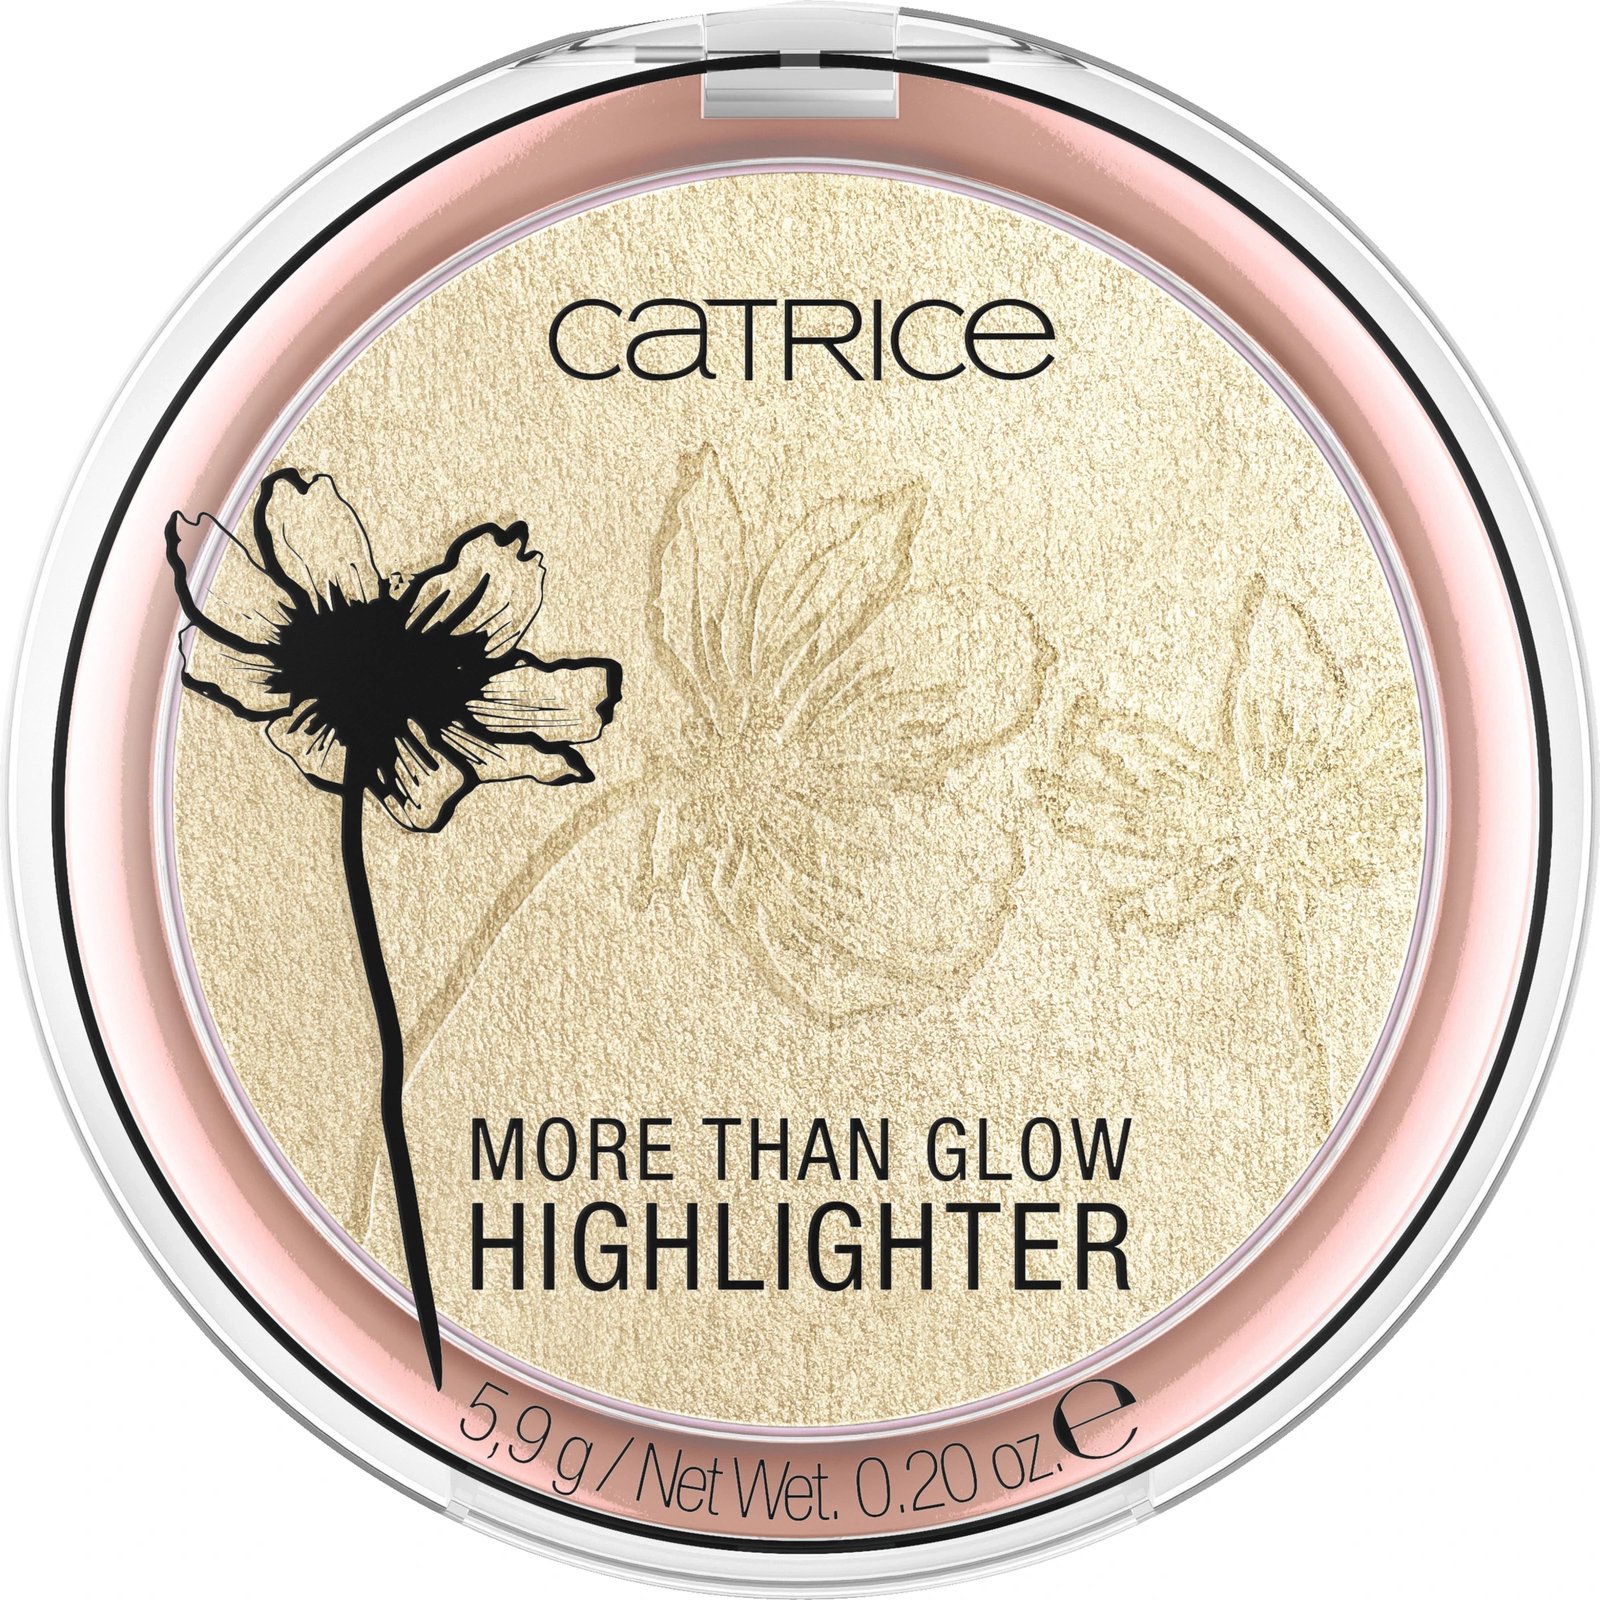 Shkelqyes More than Glow Catrice, Ultimate Platinum Glaze no.010, 5.9g